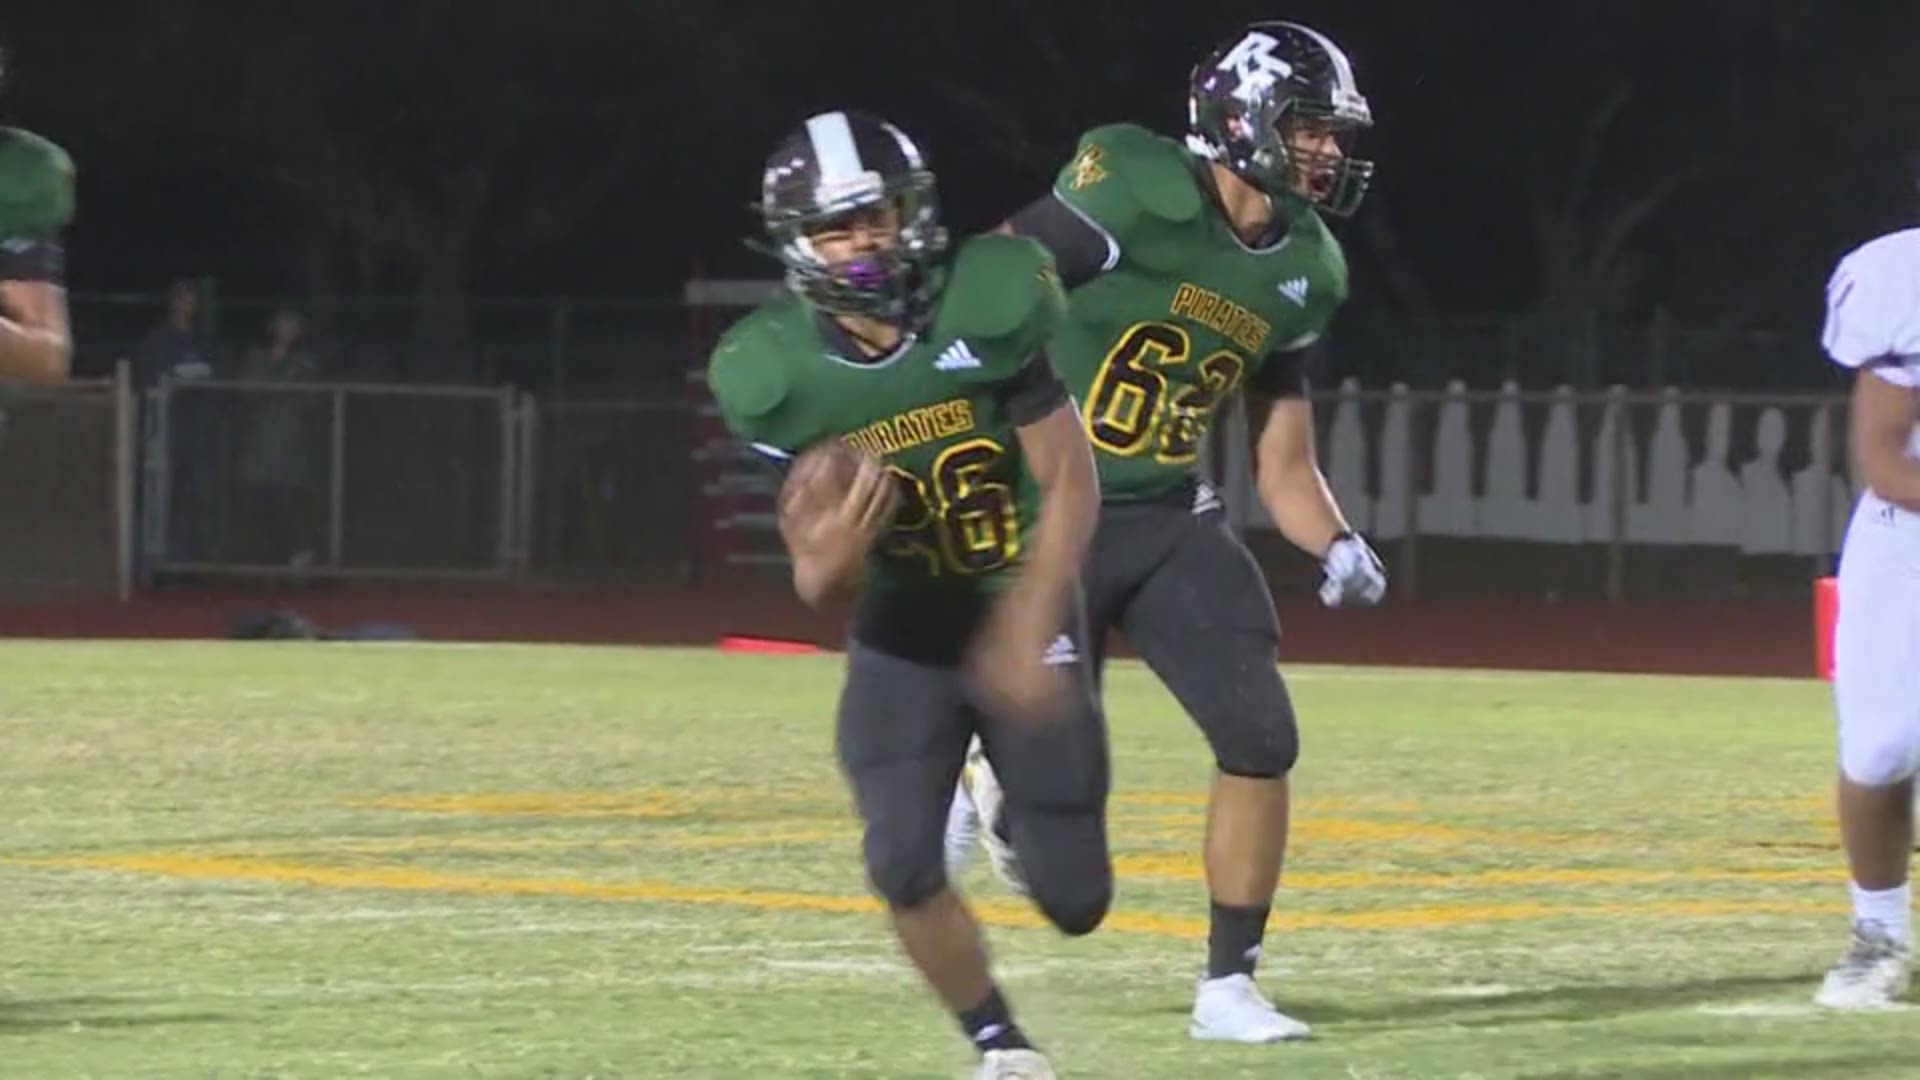 Rockport-Fulton's John Chupe Play of the Week